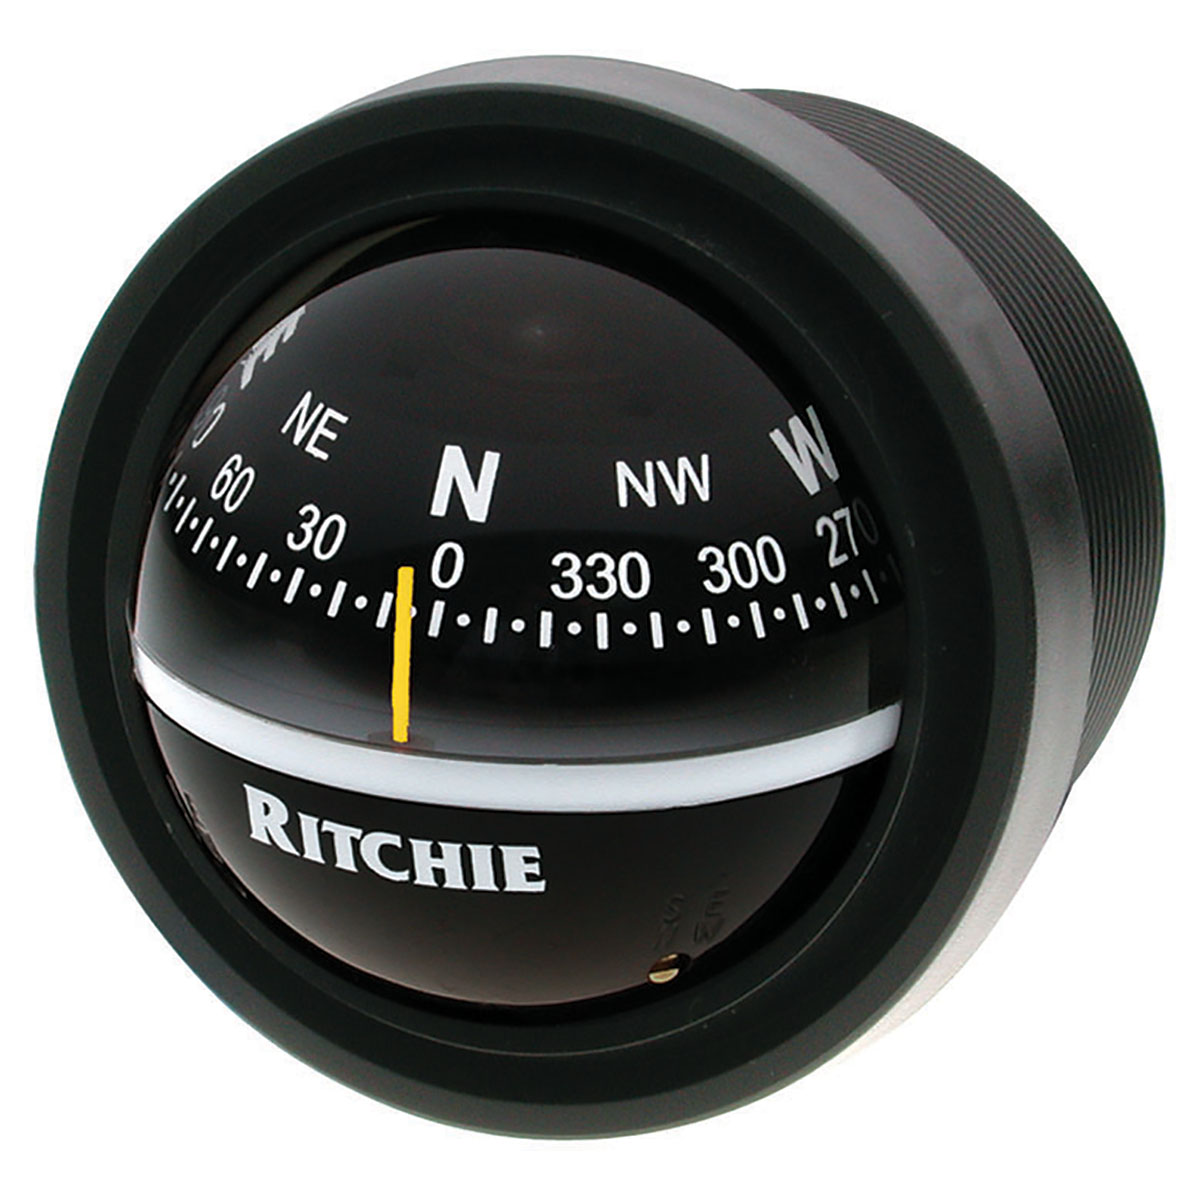 Ritchie B-81-WM Voyager Bracket Mount Compass - Wheelmark Approved  f/Lifeboat & Rescue Boat Use